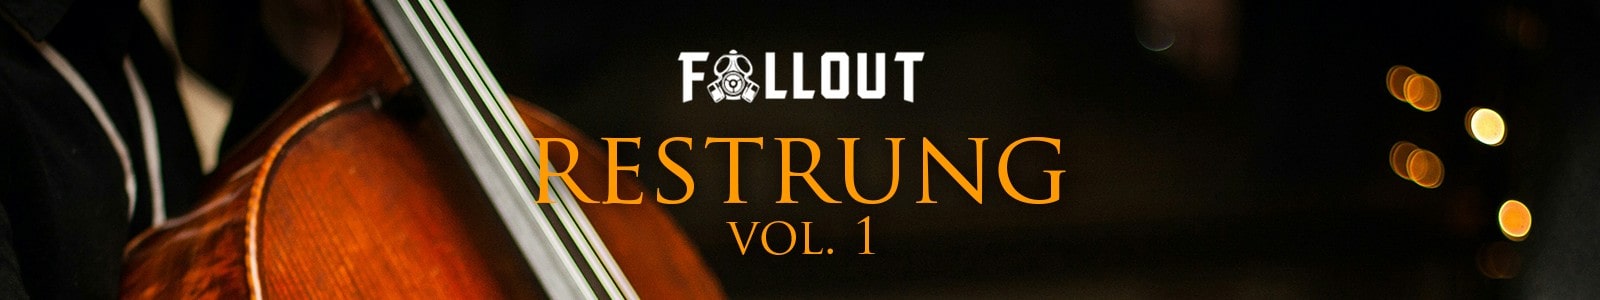 Restrung vol. 1 by Fallout Music Group